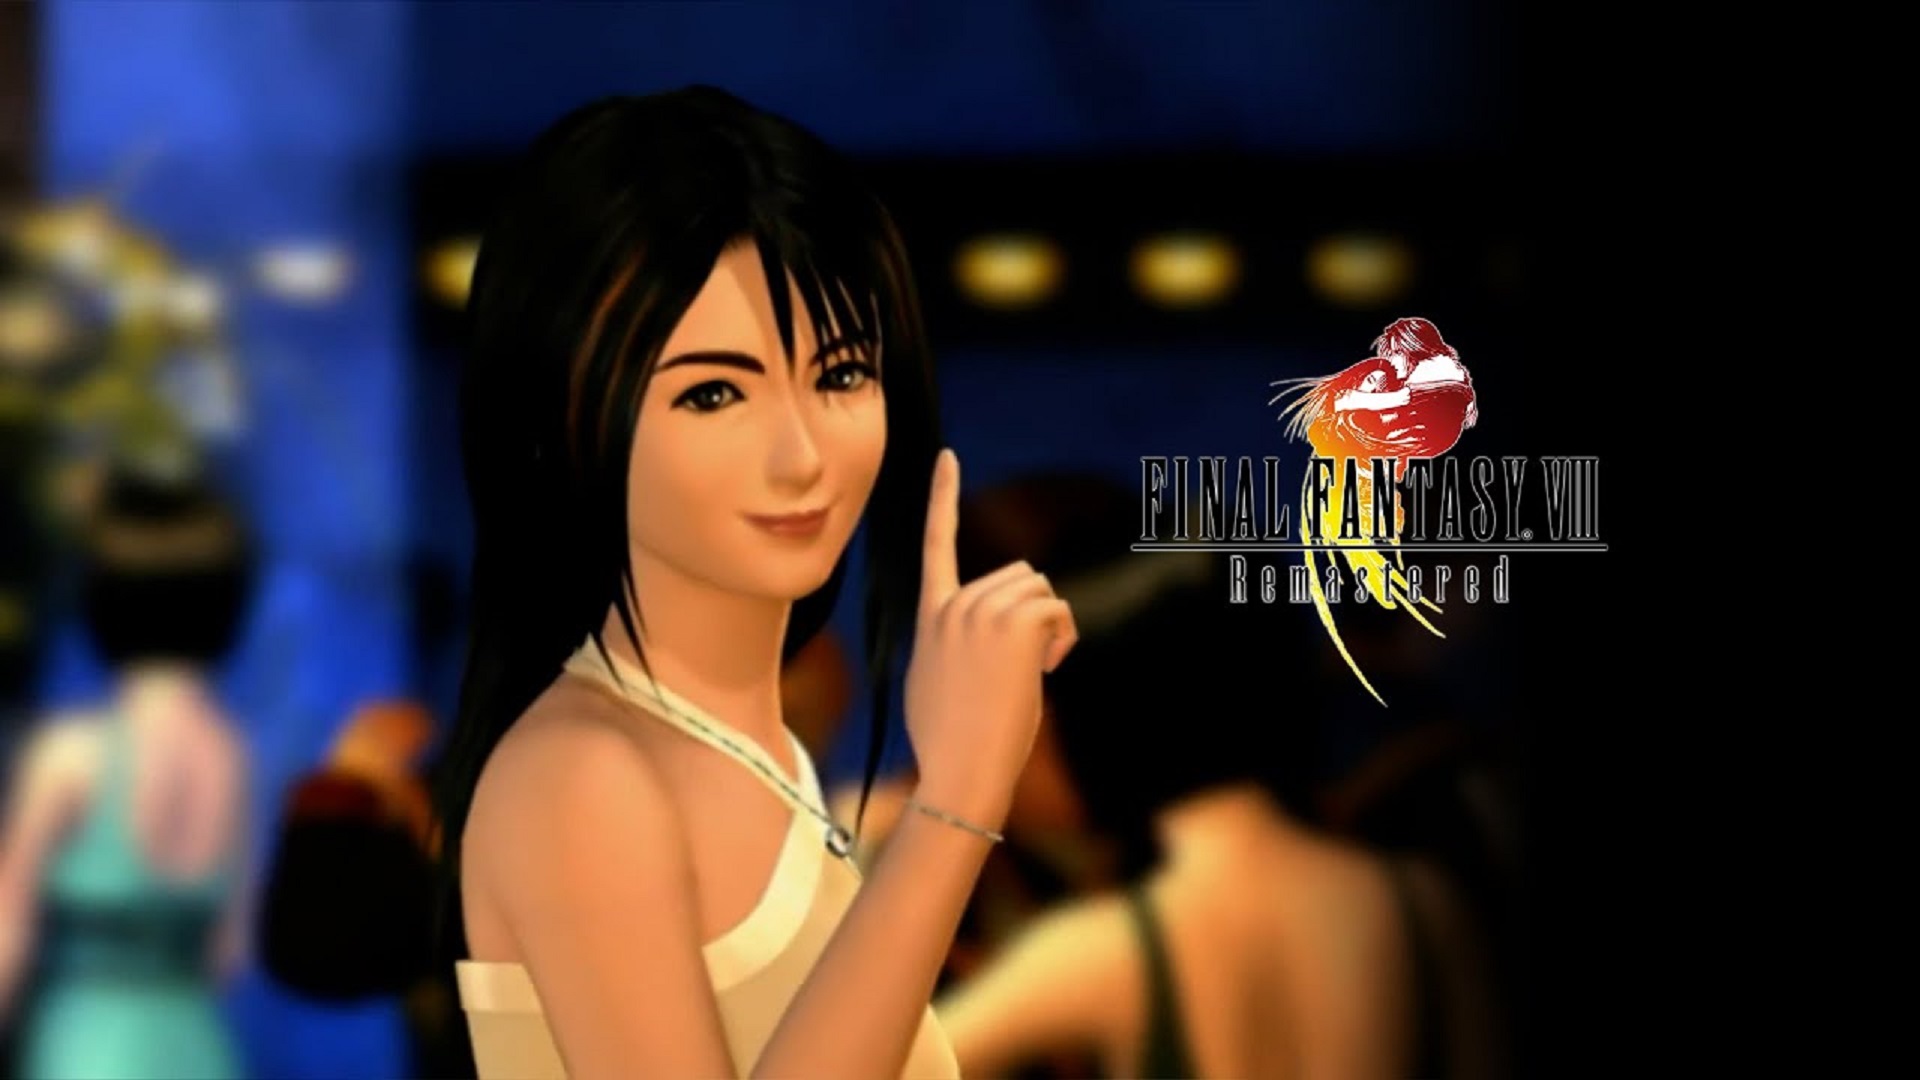 Best iPhone games: Final Fantasy VIII. Image shows the character Rinoa and the game's logo.